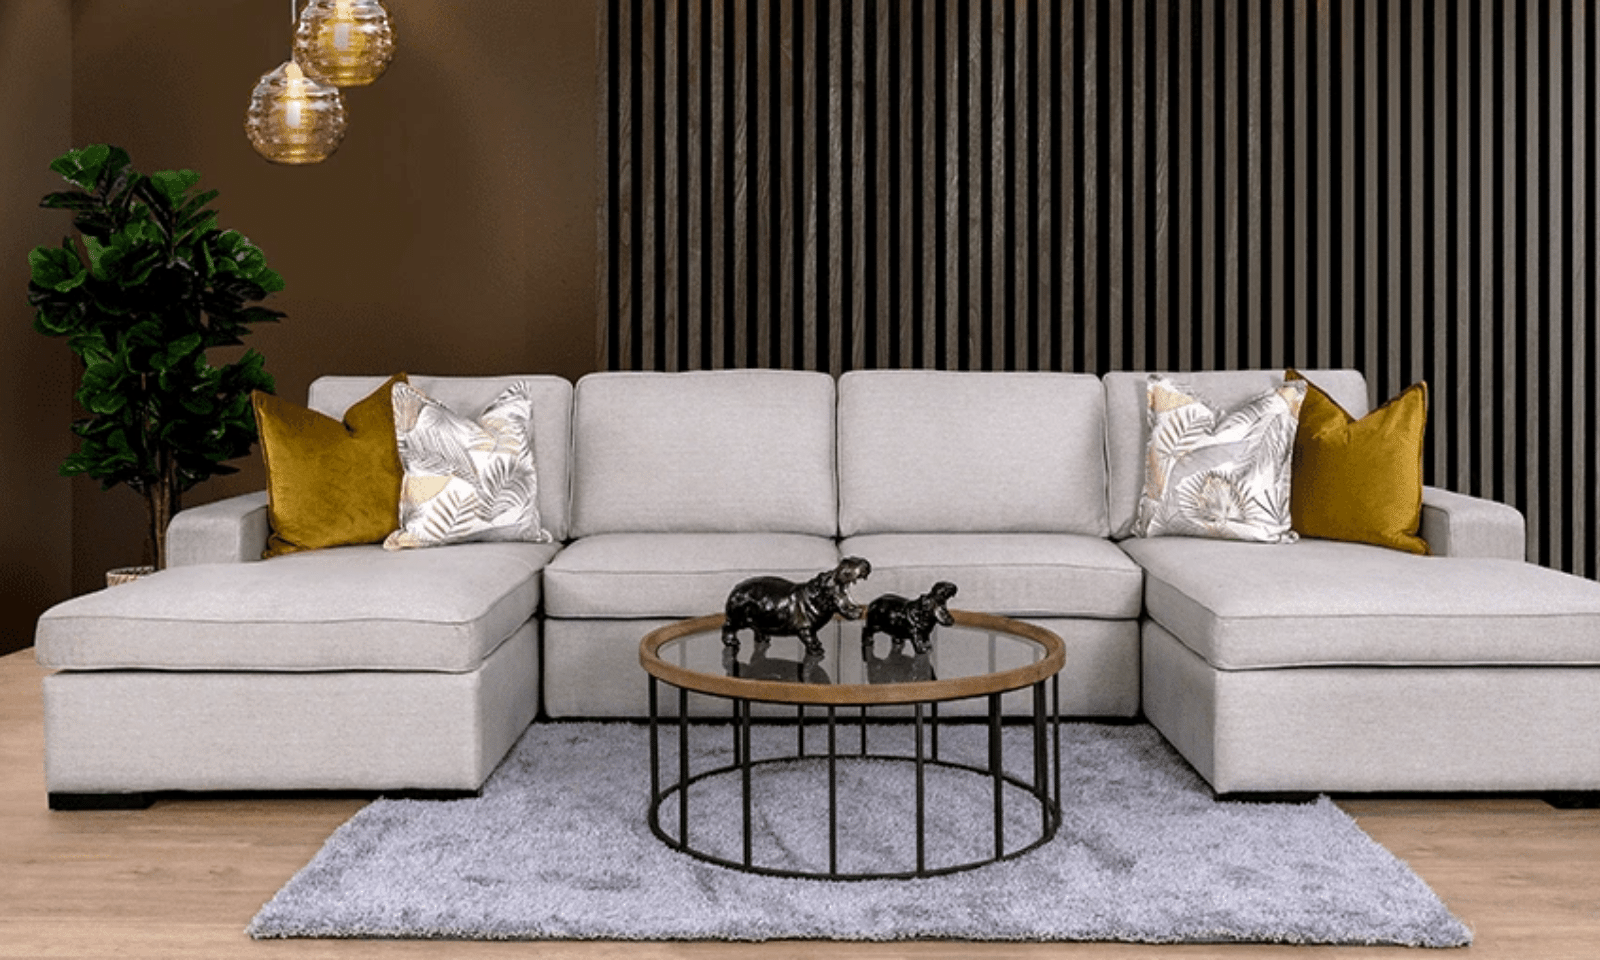 HOW TO ARRANGE YOUR LOUNGE WHEN YOU HAVE A SECTIONAL SOFA